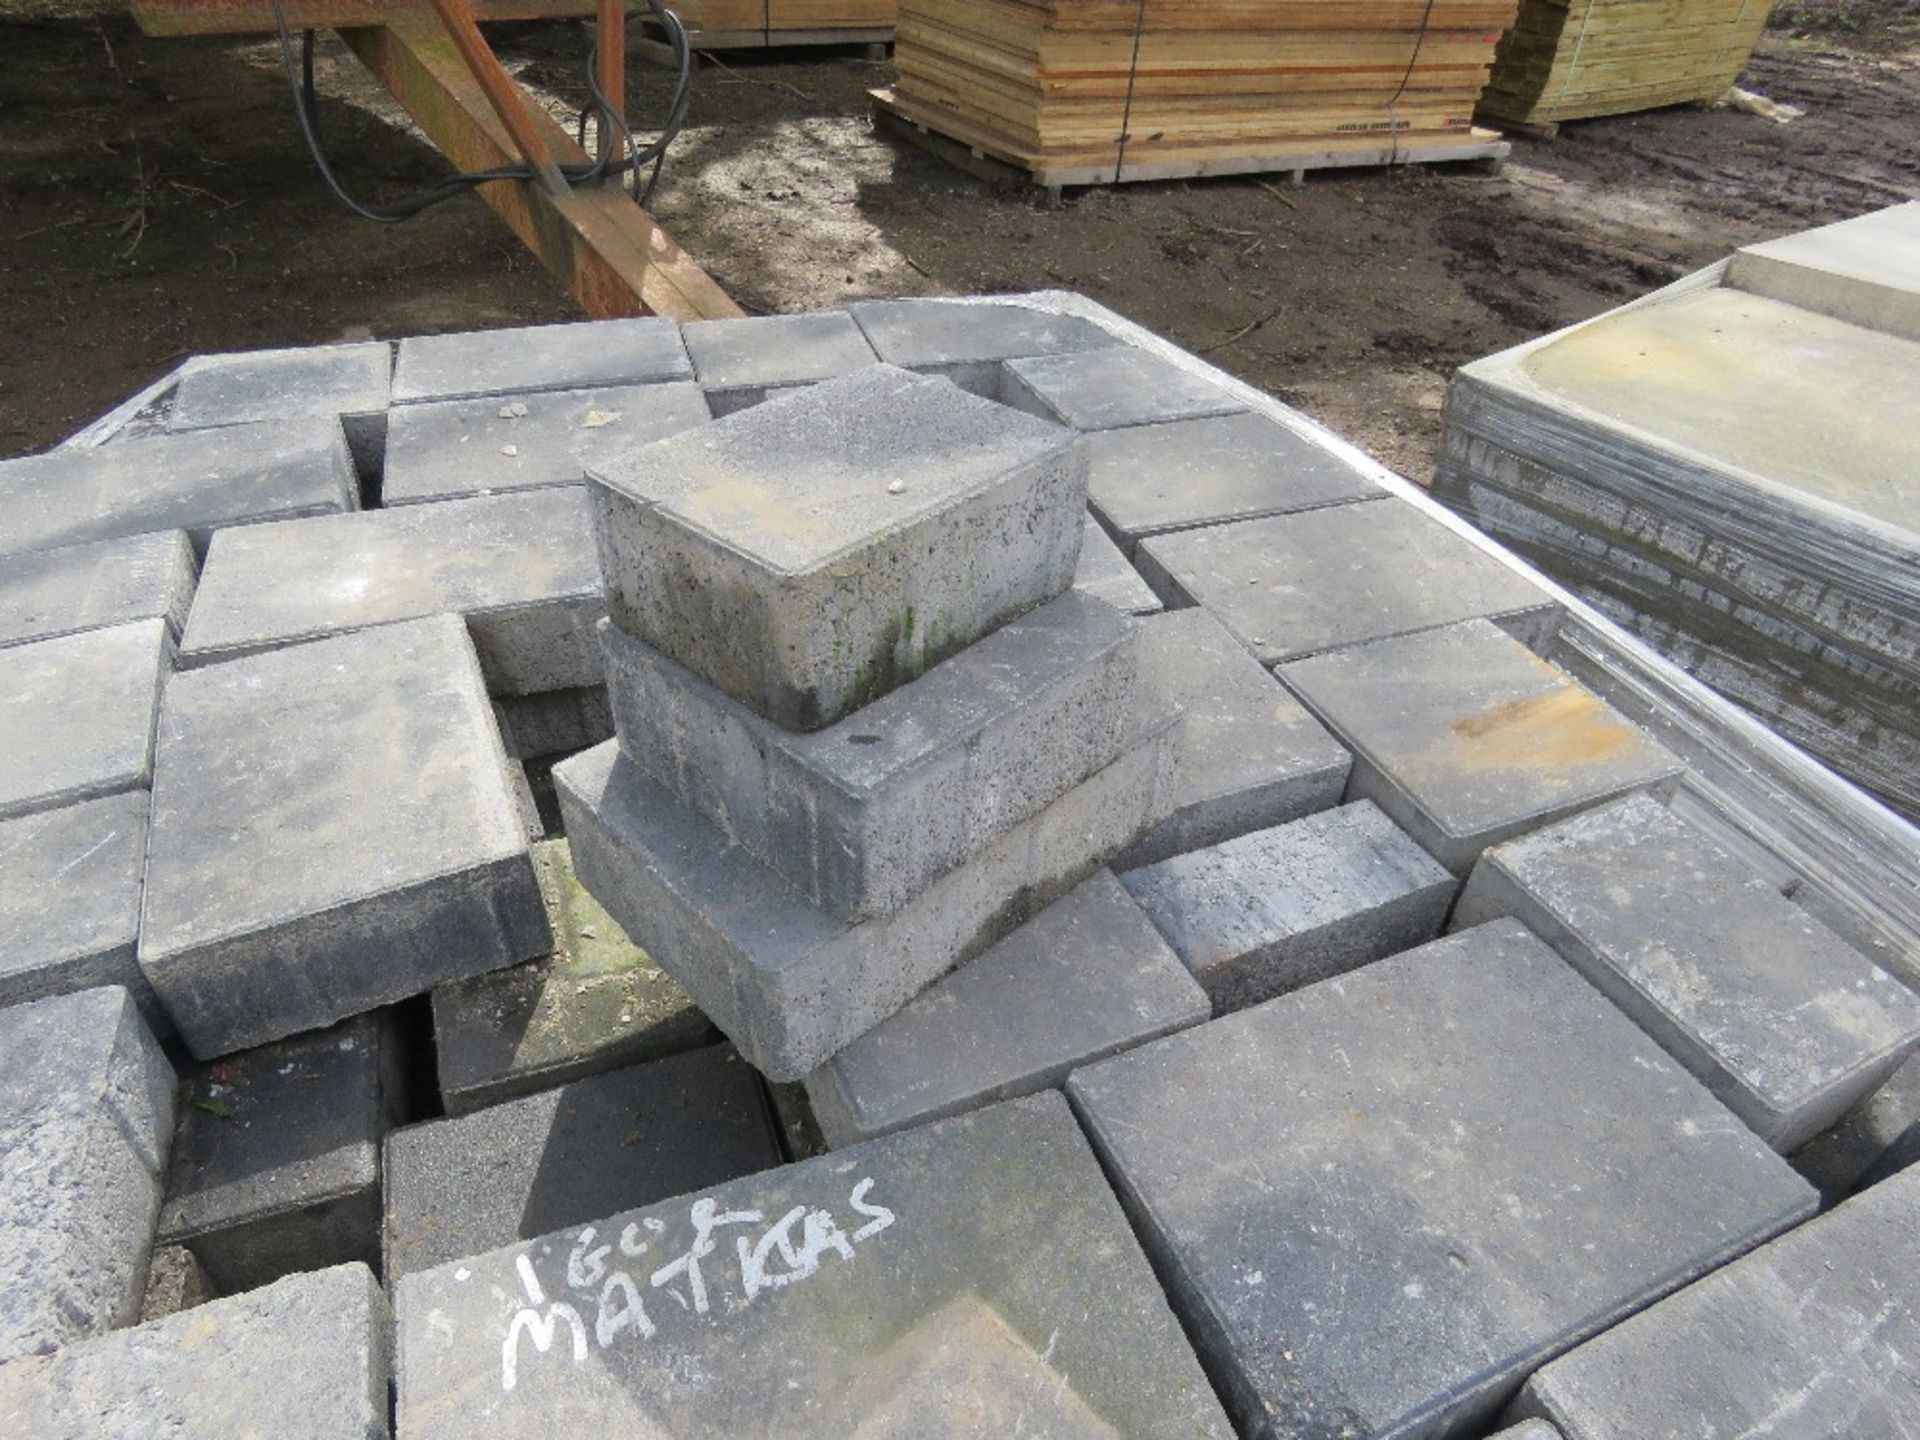 2 X PALLETS OF BLOCK PAVERS, BLACK COLOURED. - Image 7 of 7